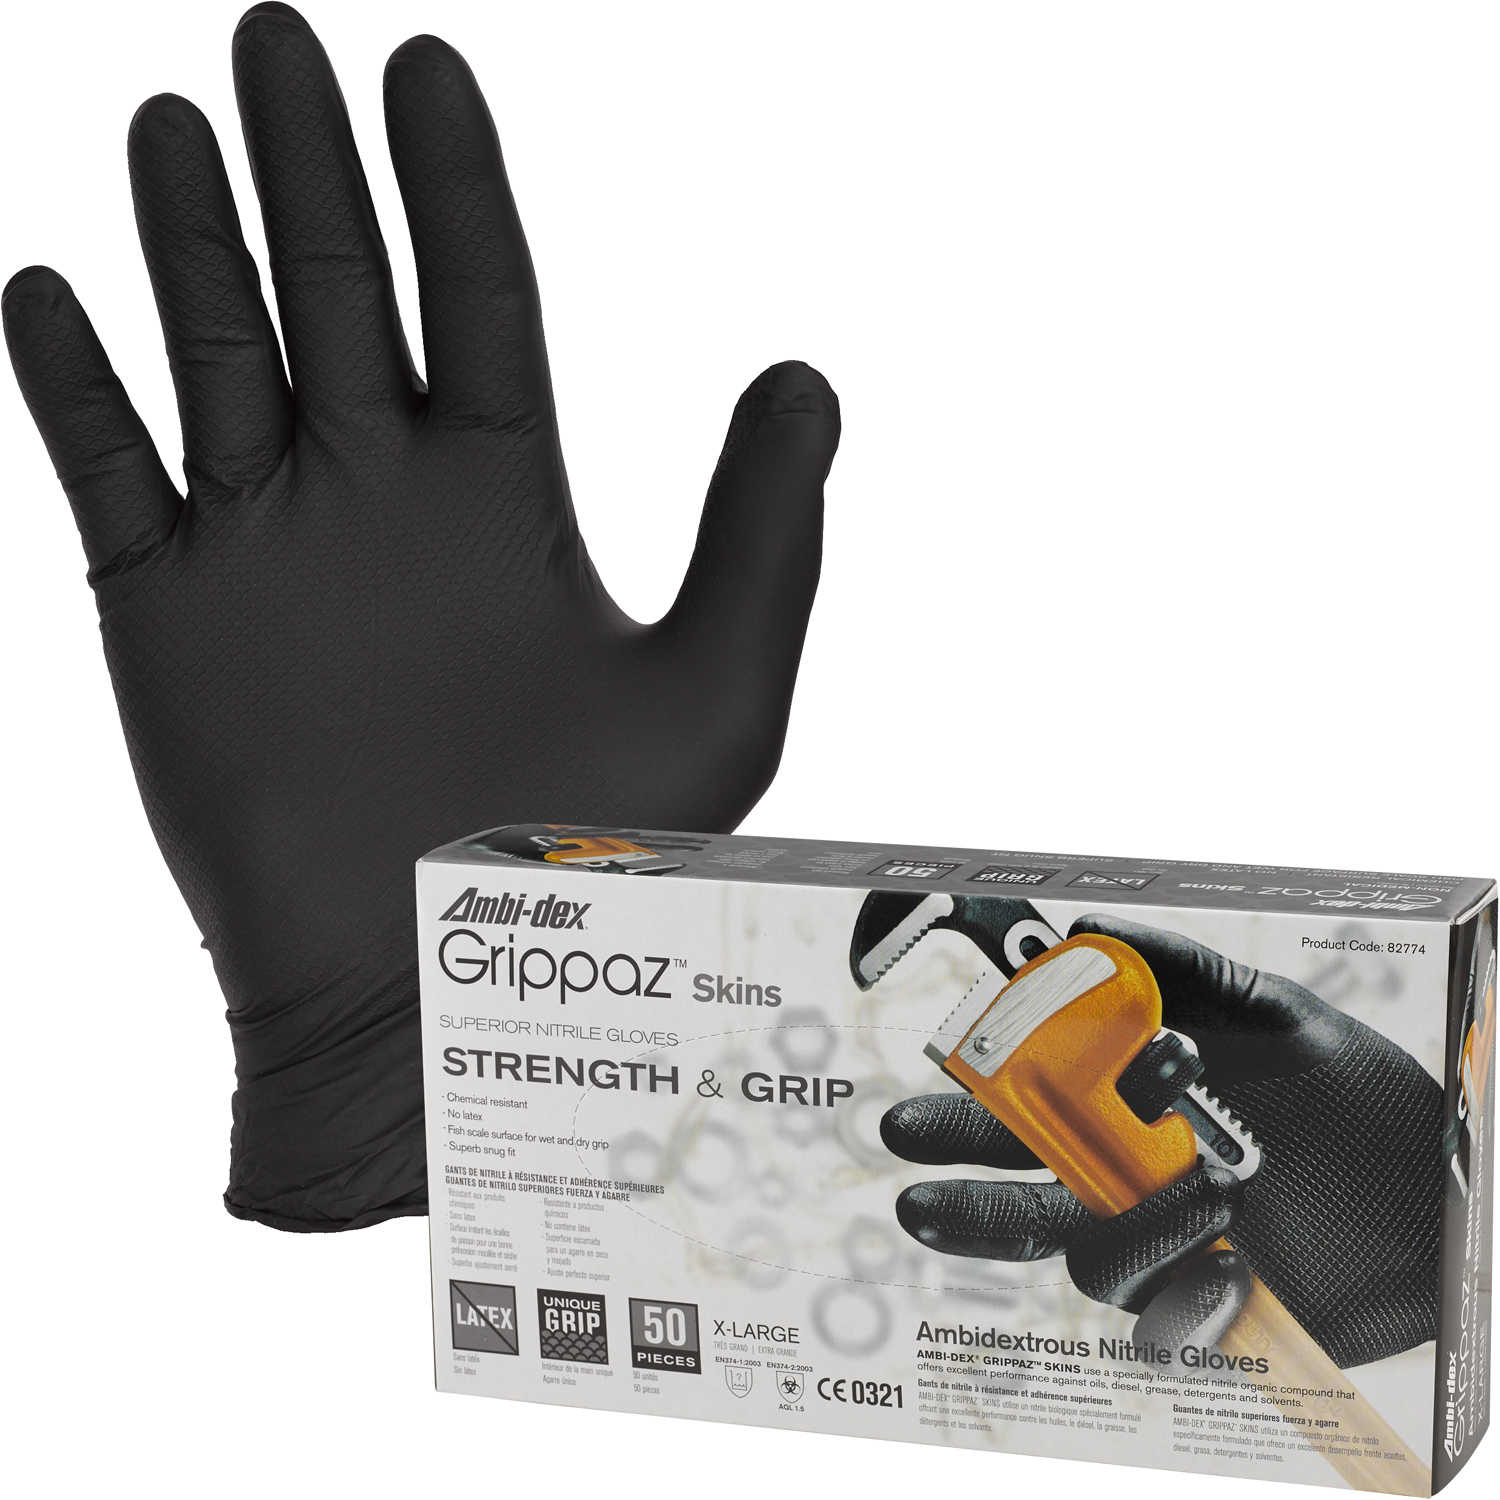 Grippaz Nitrile Gloves Retail Bag of 10 Large Traction Grip Ambidextrous37297 